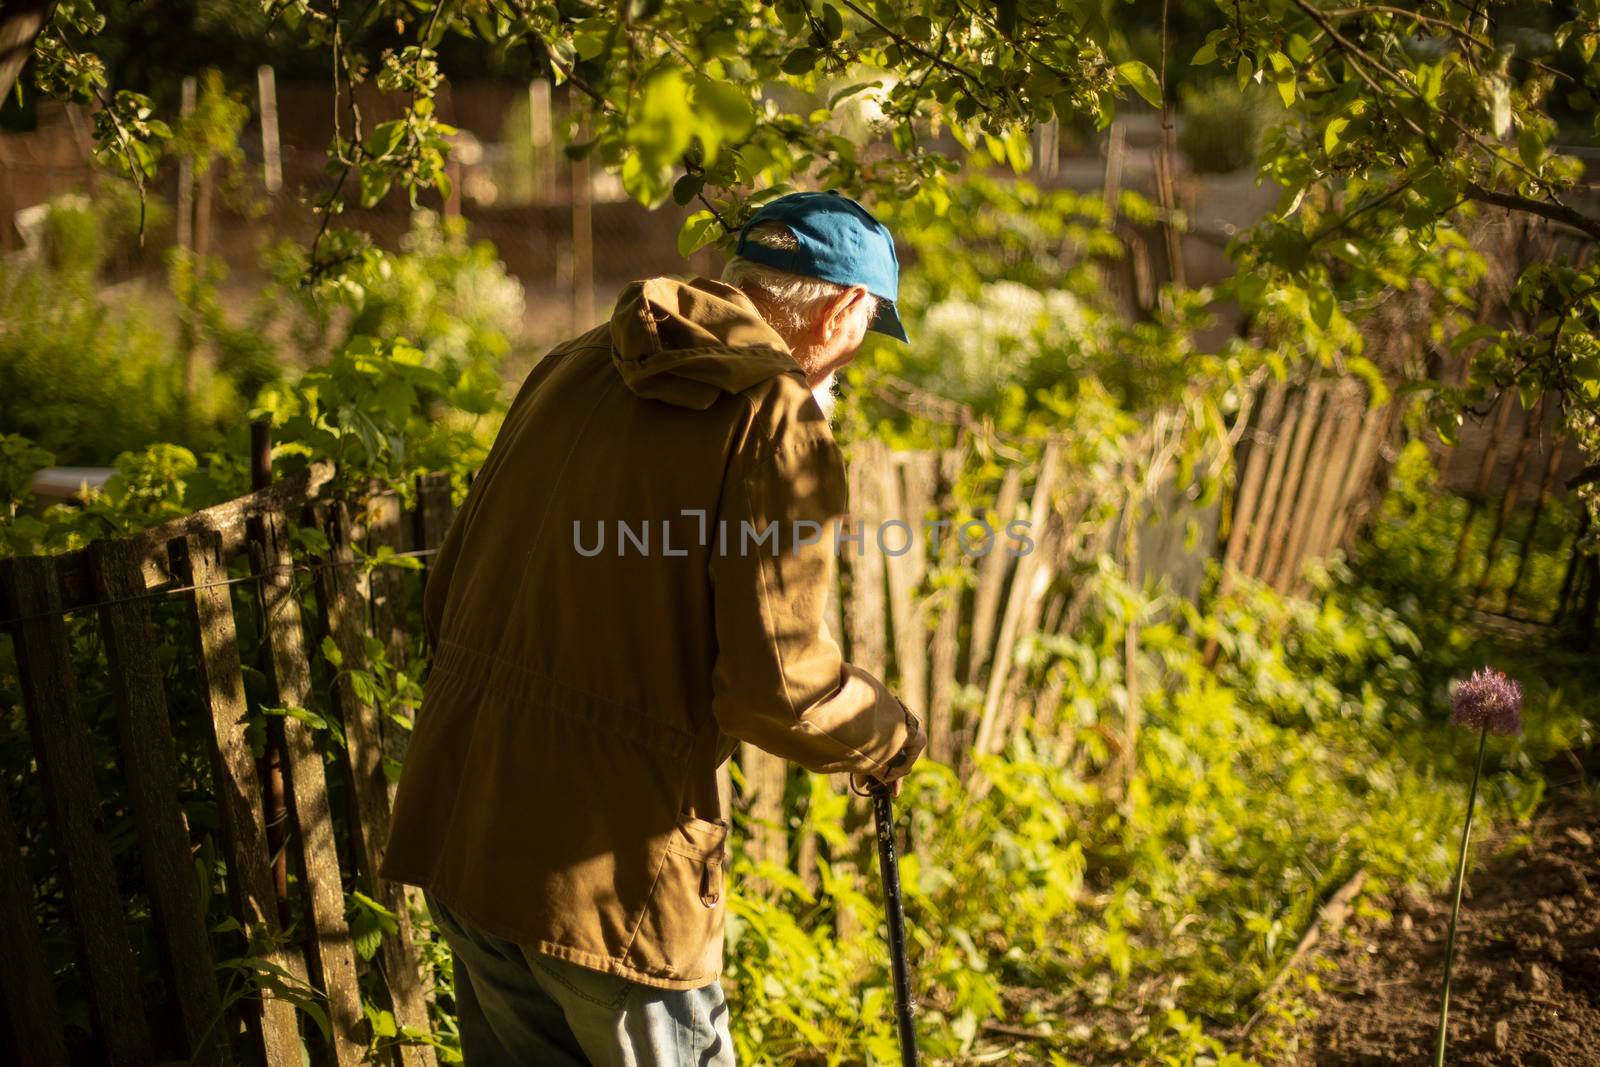 An elderly man in Russia in the garden. Old grandfather in the summer in a green jacket. A person walks in nature during the day. Light illuminates the man's back.